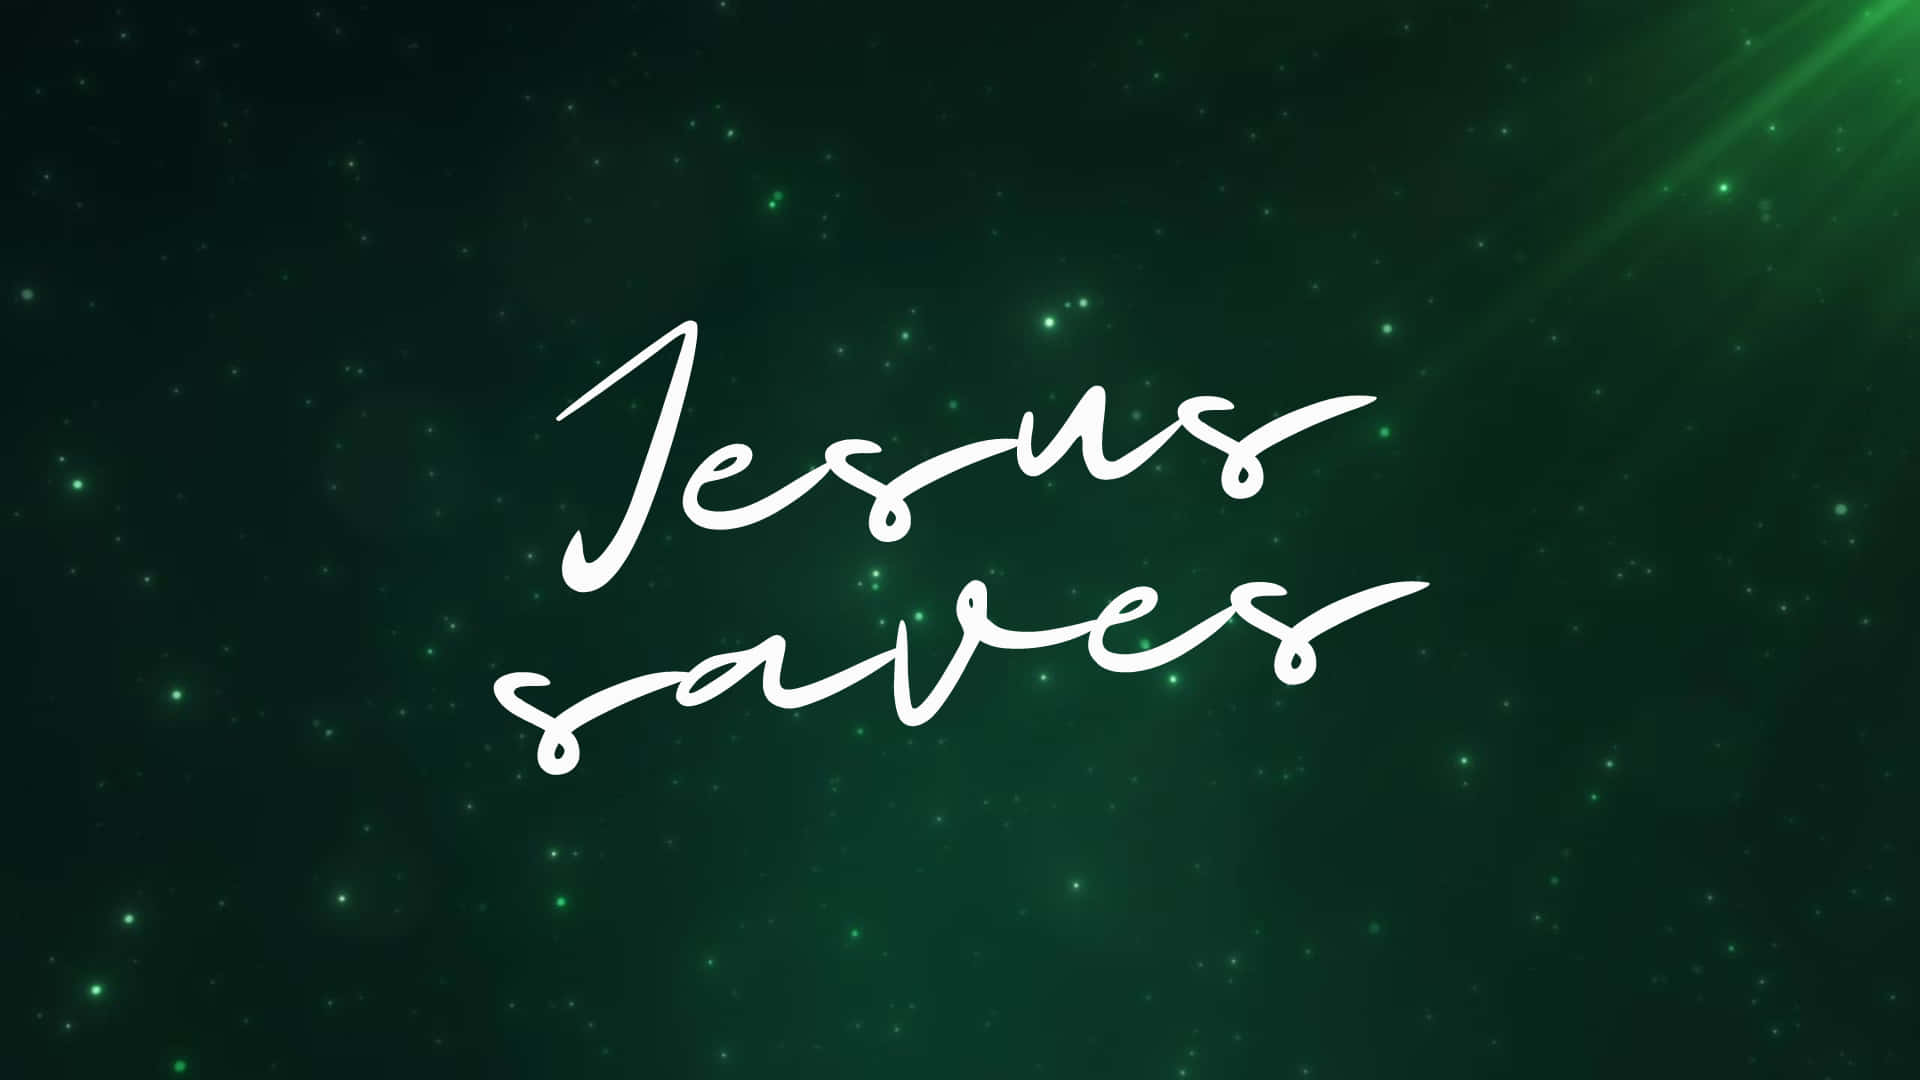 "May you receive the blessings of Jesus so He can save your life" Wallpaper